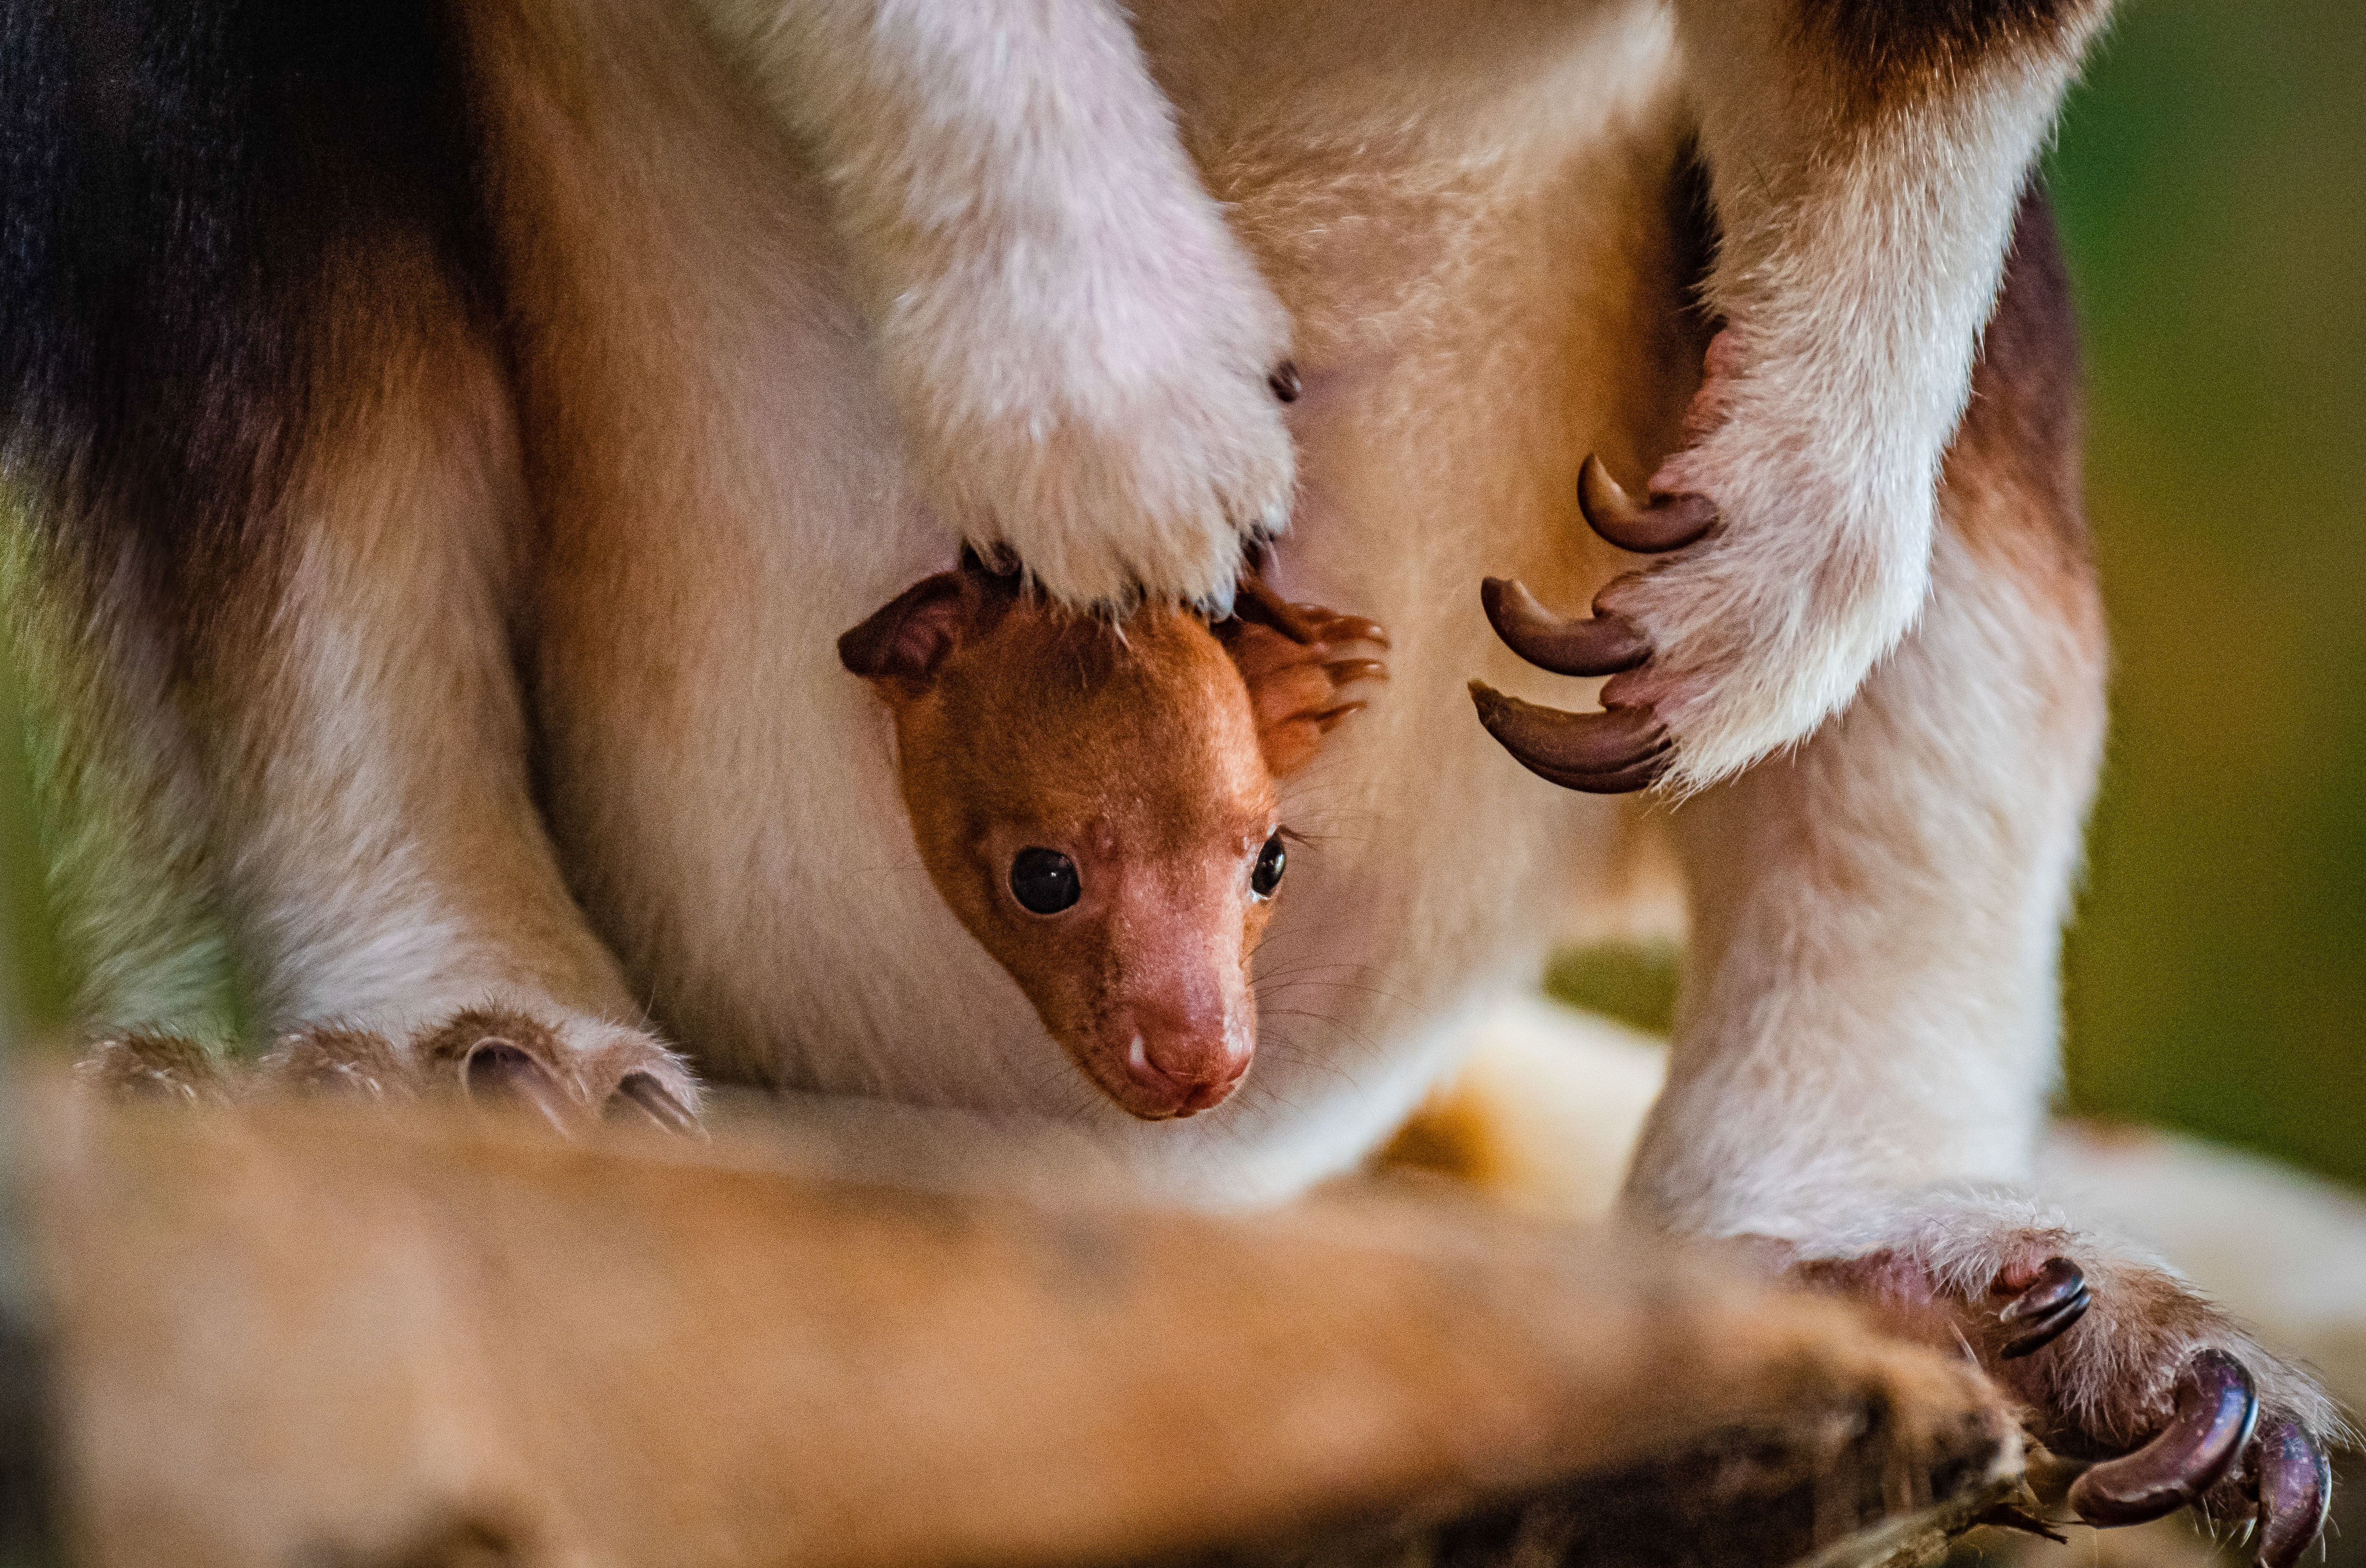 A rare tree kangaroo joey – the first to ever be born at Chester Zoo – has emerged from its mum’s pouch